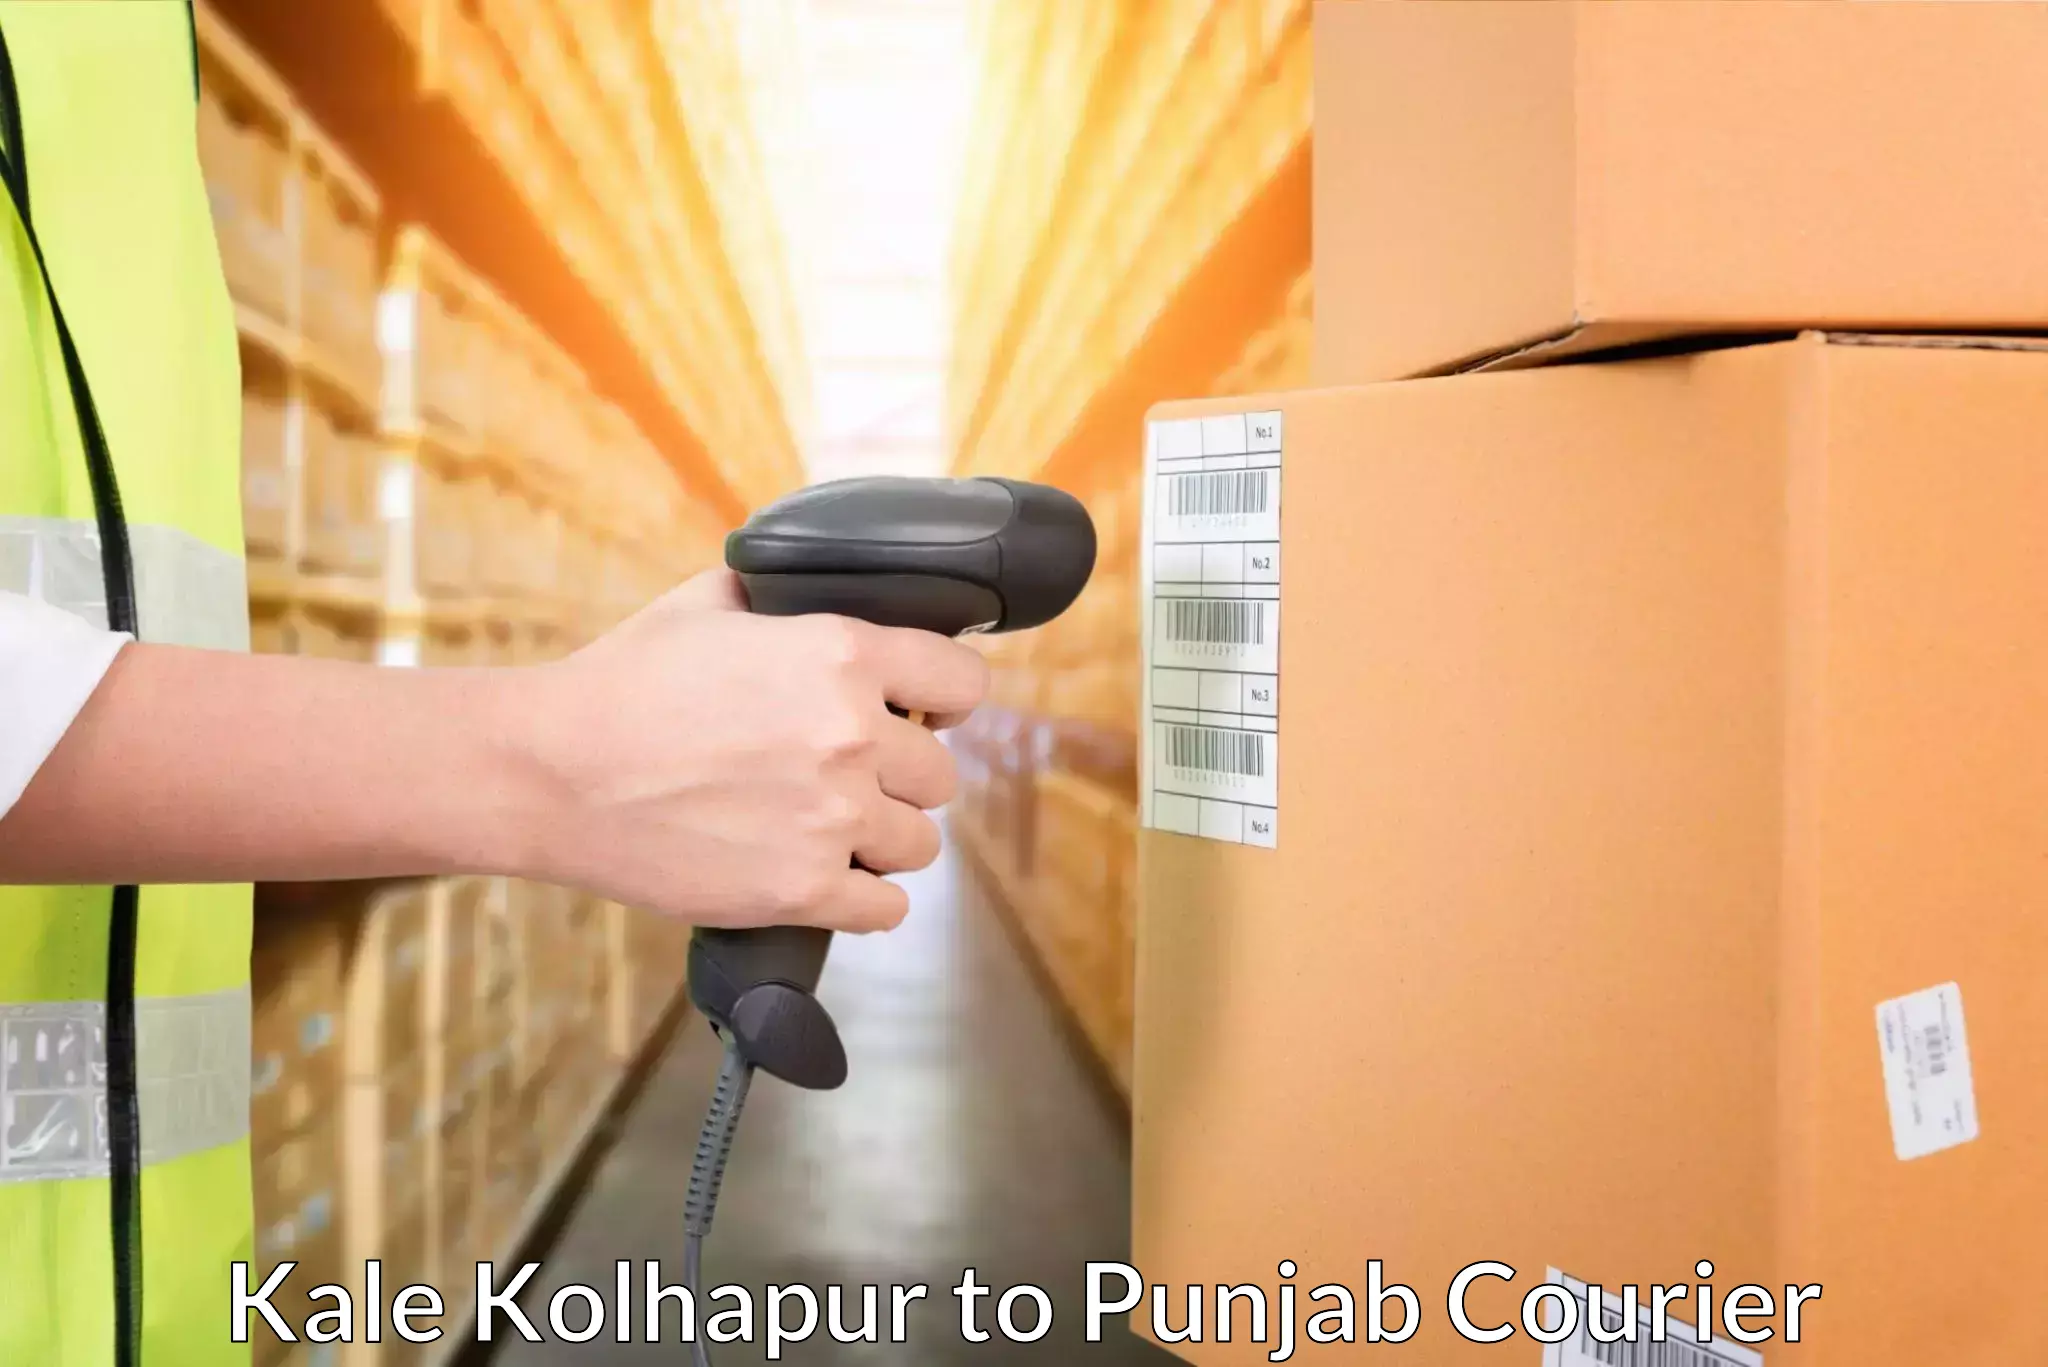 Express delivery capabilities Kale Kolhapur to Punjab